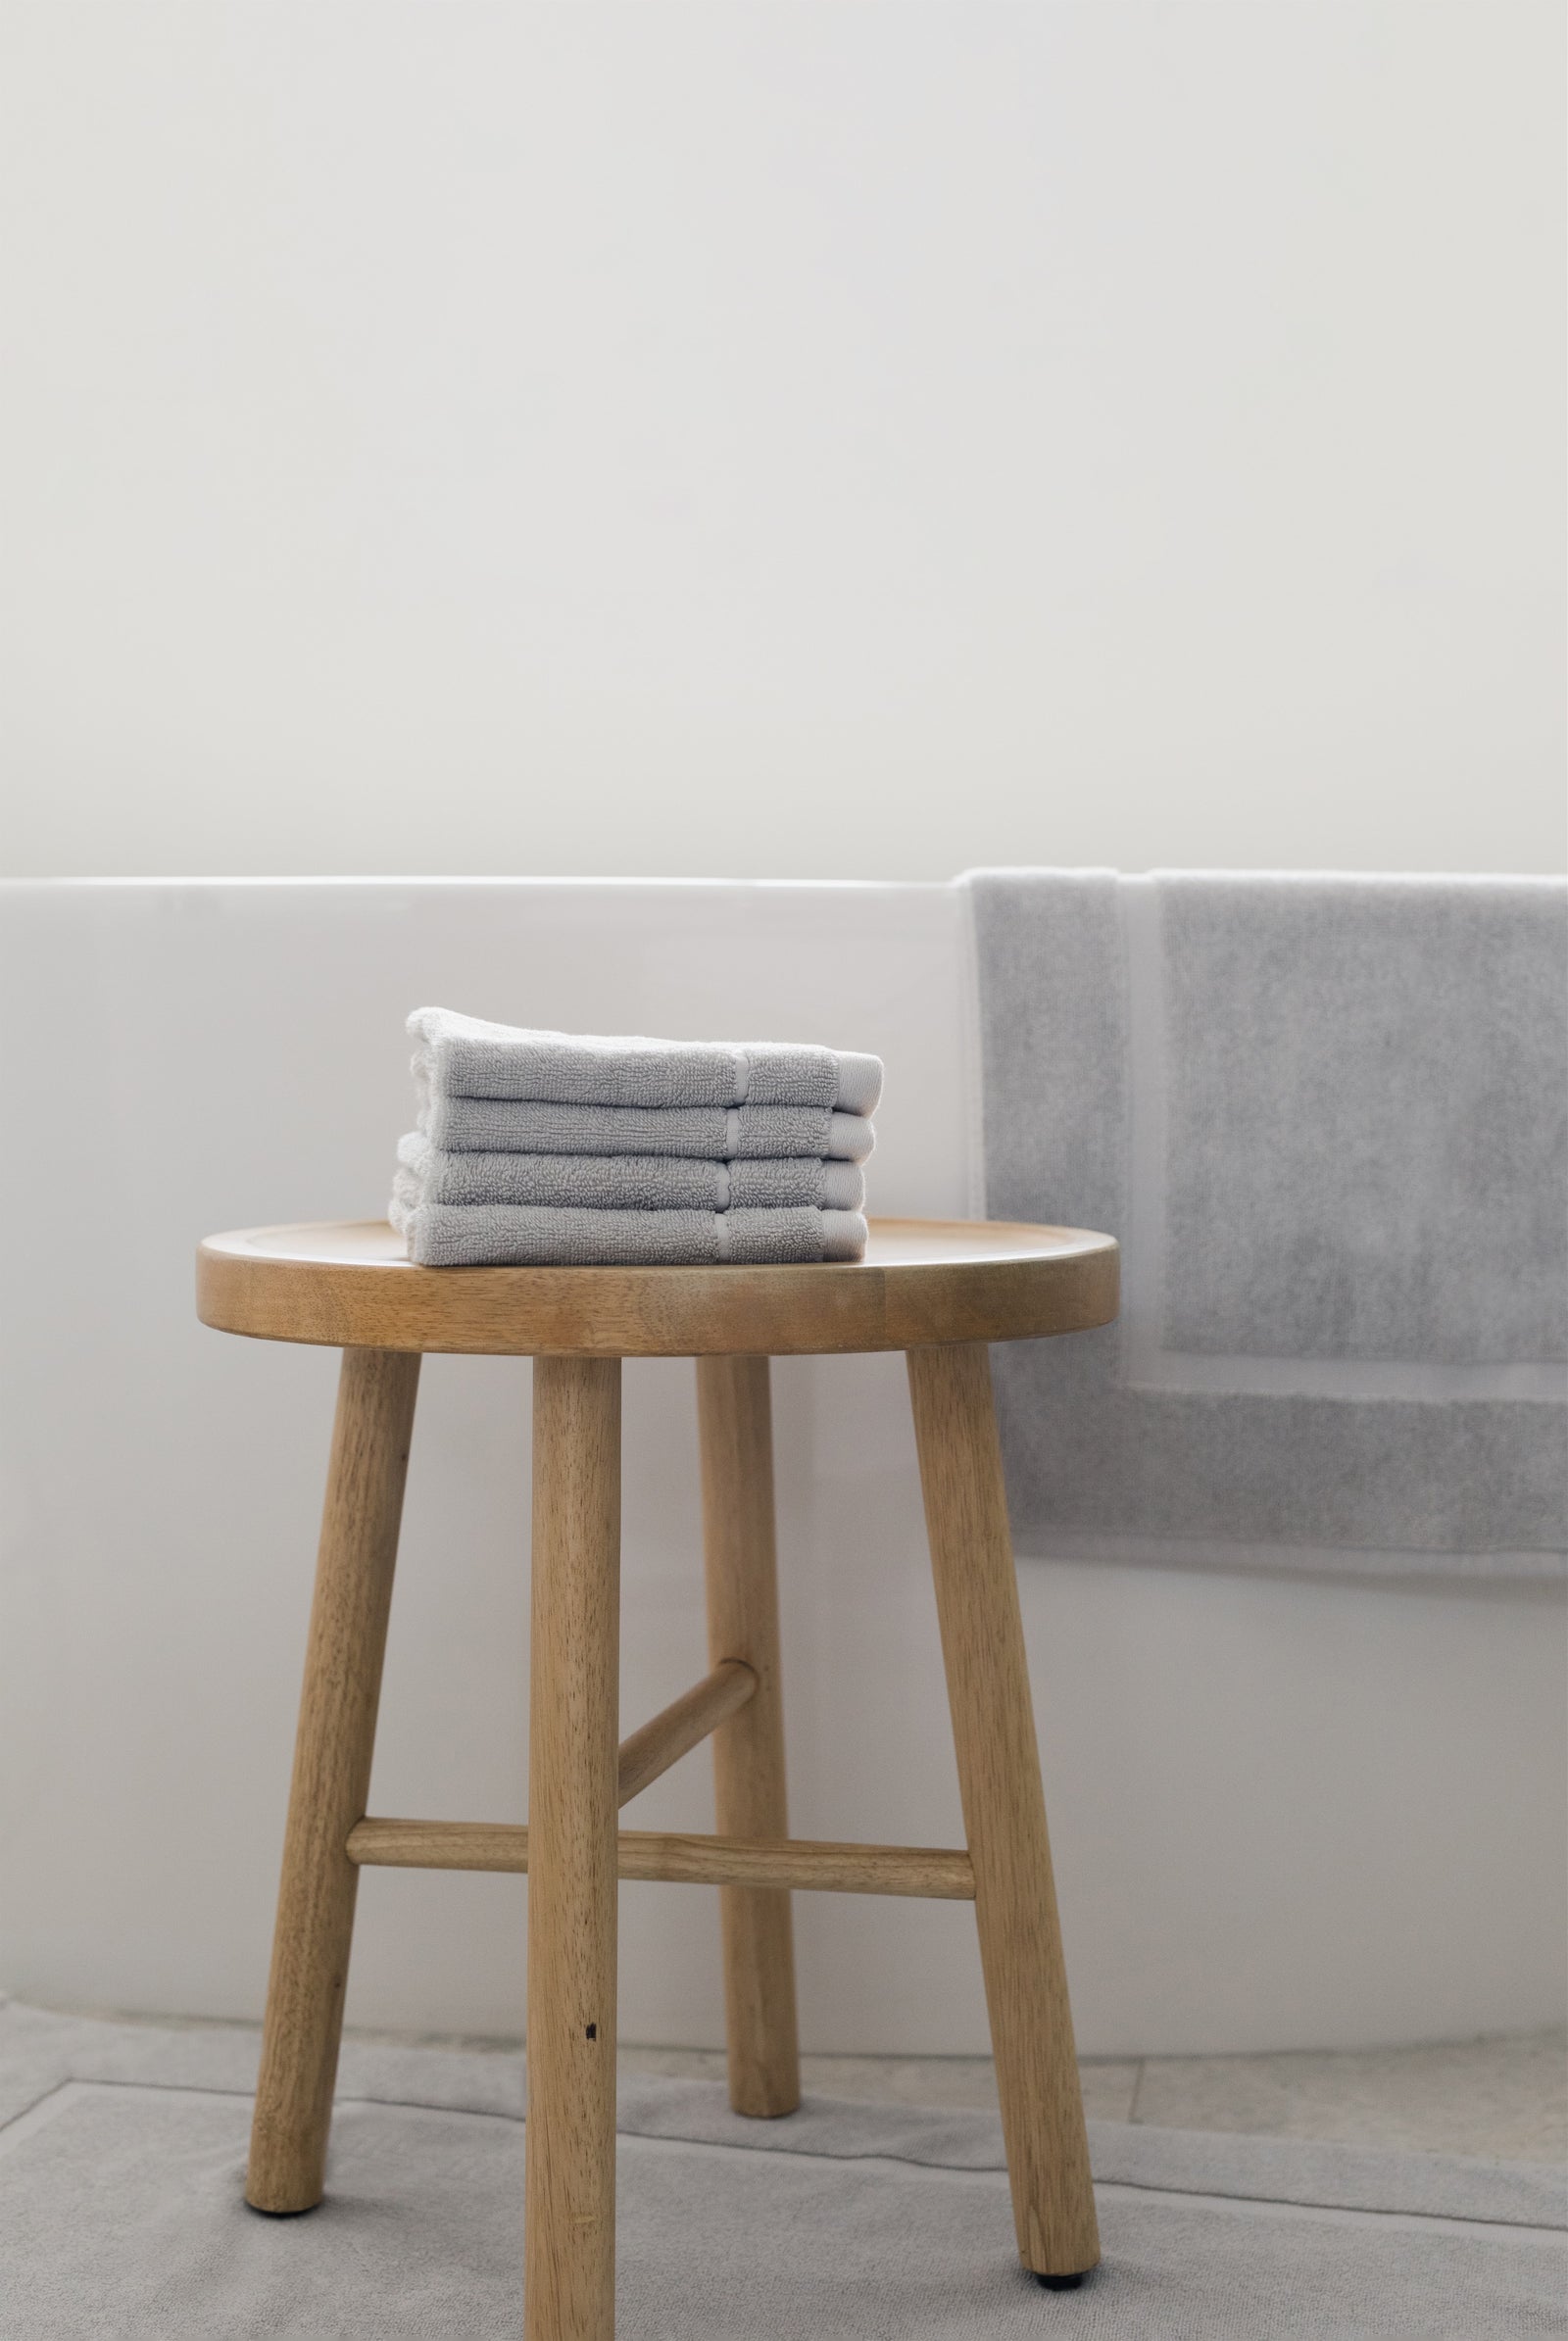 Light Grey Premium Plush Bath Mat resting on white bathtub. The photo was taken in a bathroom showing a wooden stool with wash cloths next to the bathtub.